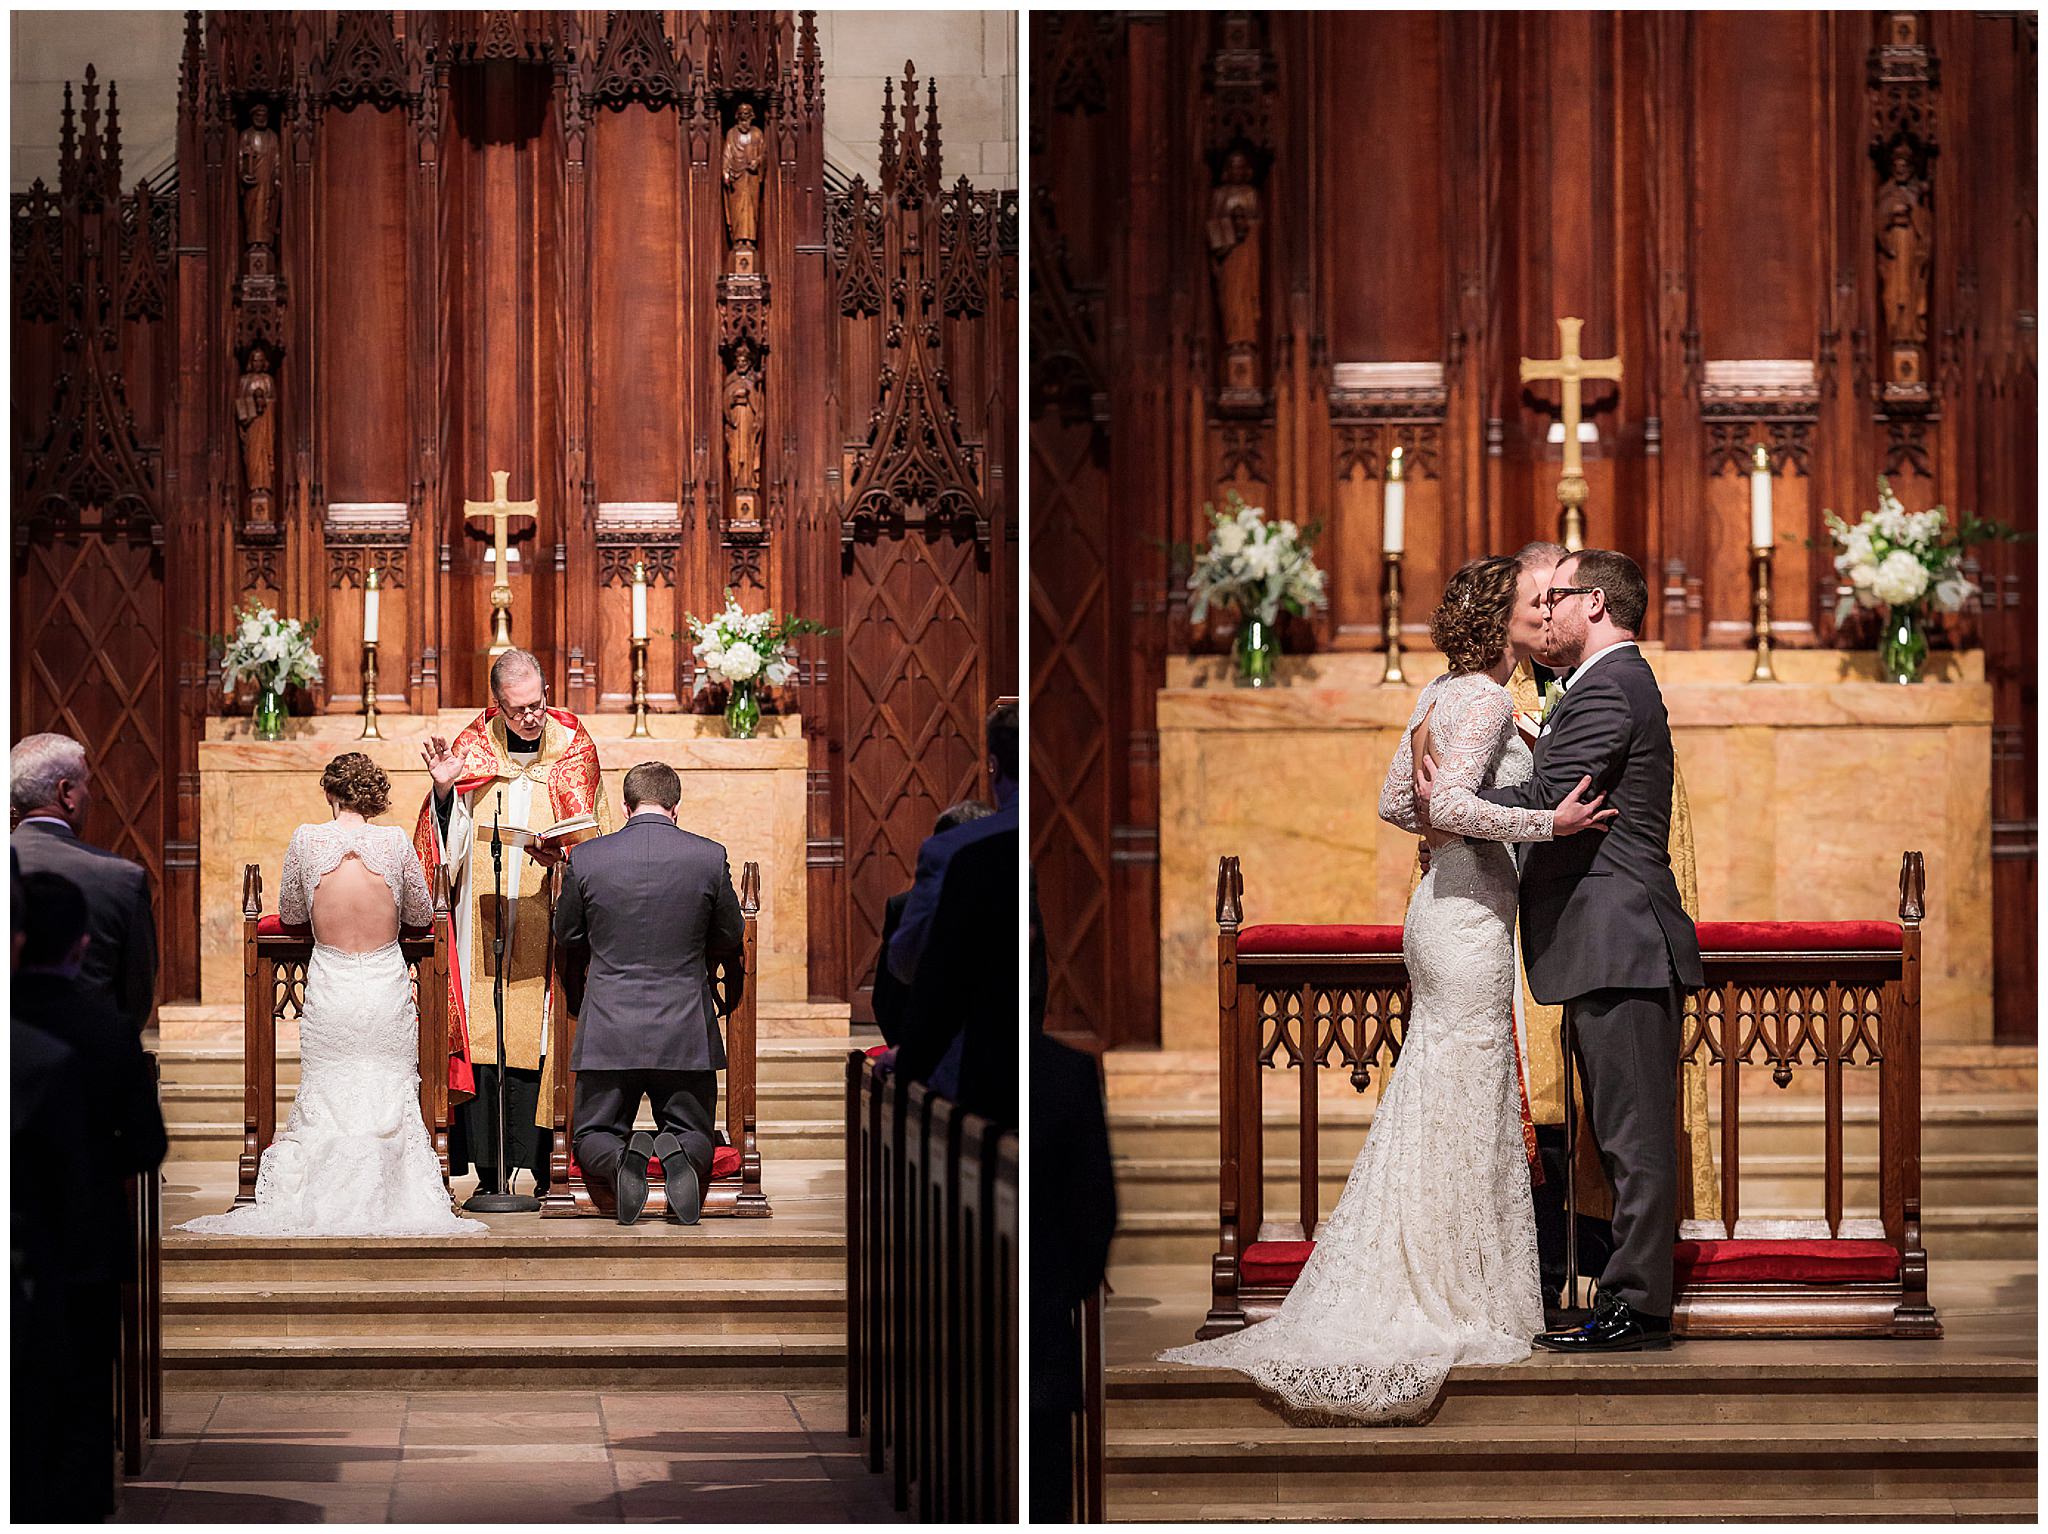 Bride & groom's first kiss at Heinz Chapel in Pittsburgh, PA